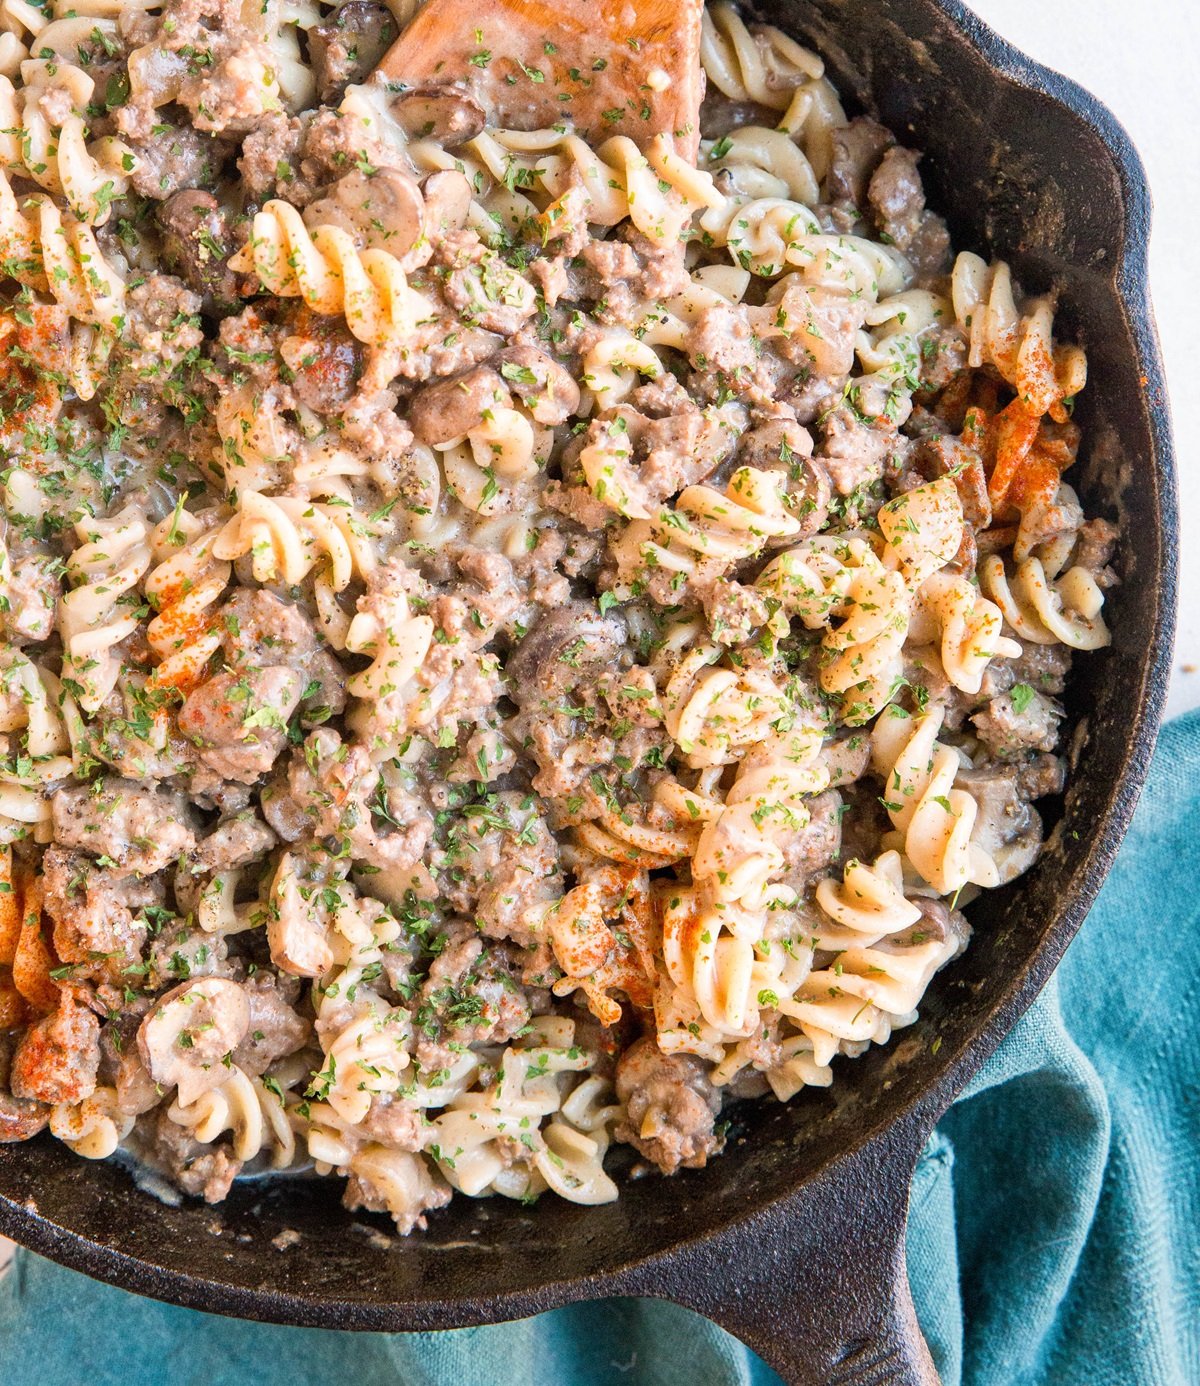 Cast iron skillet full of gluten-free ground beef stroganoff and a blue napkin to the side.